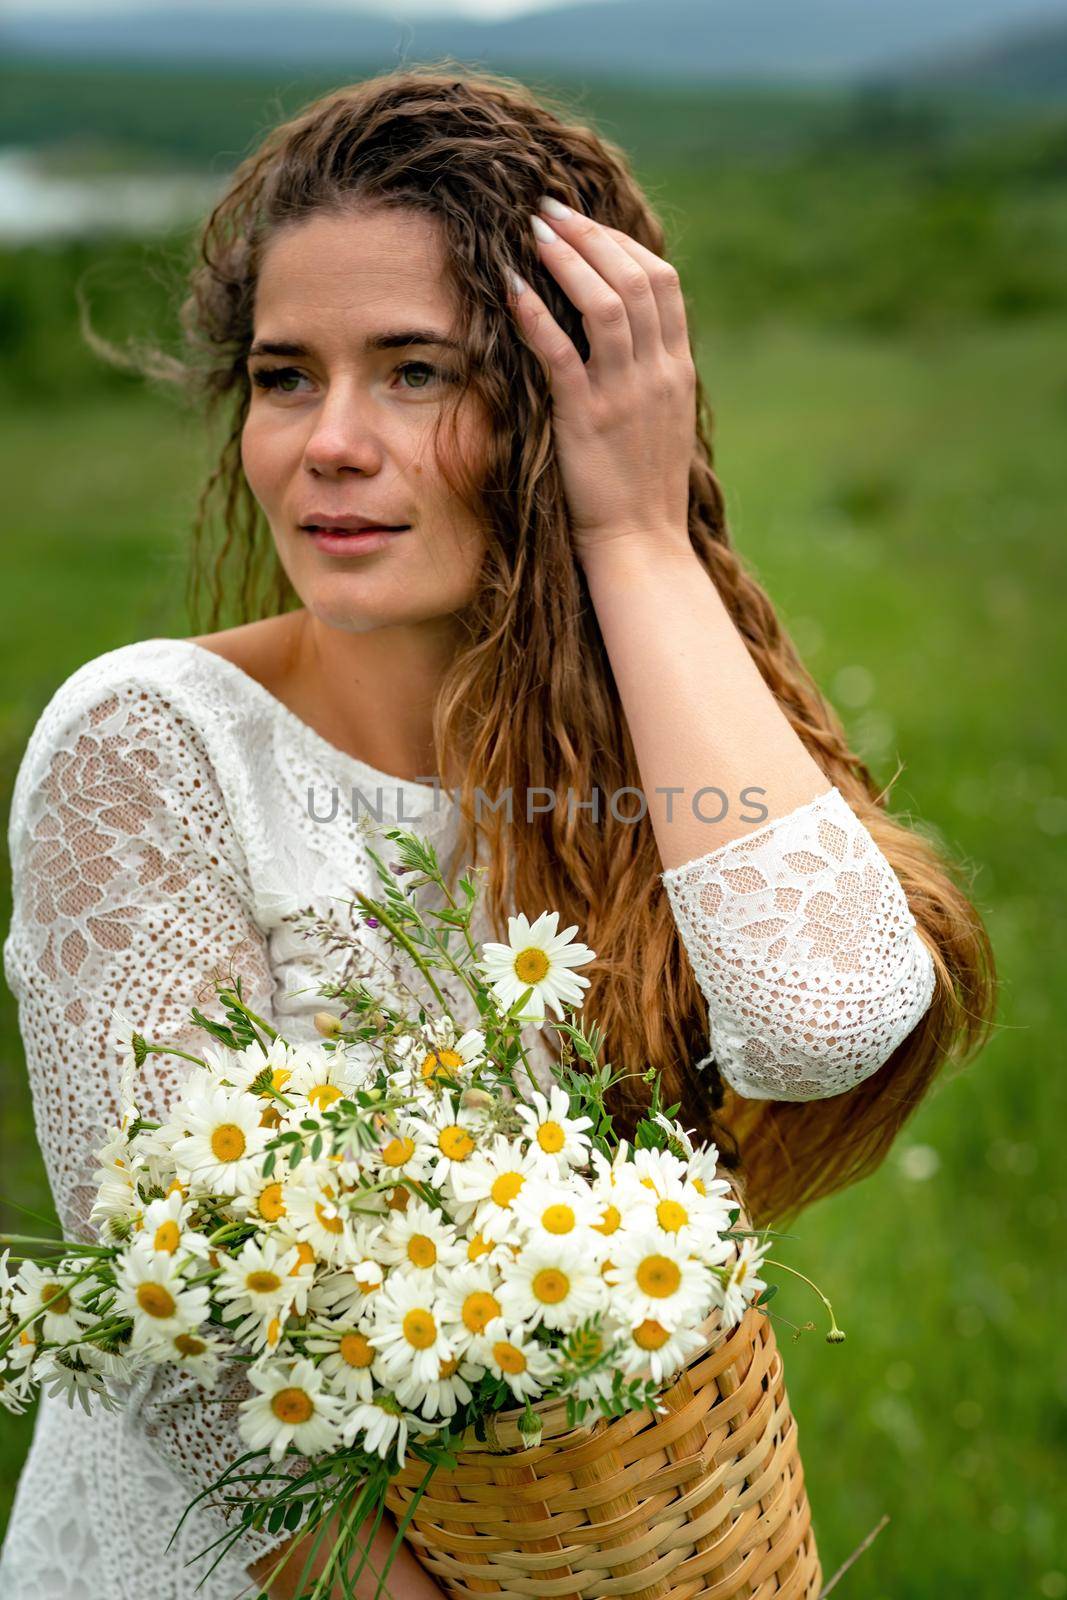 A middle-aged woman holds a large bouquet of daisies in her hands. Wildflowers for congratulations.